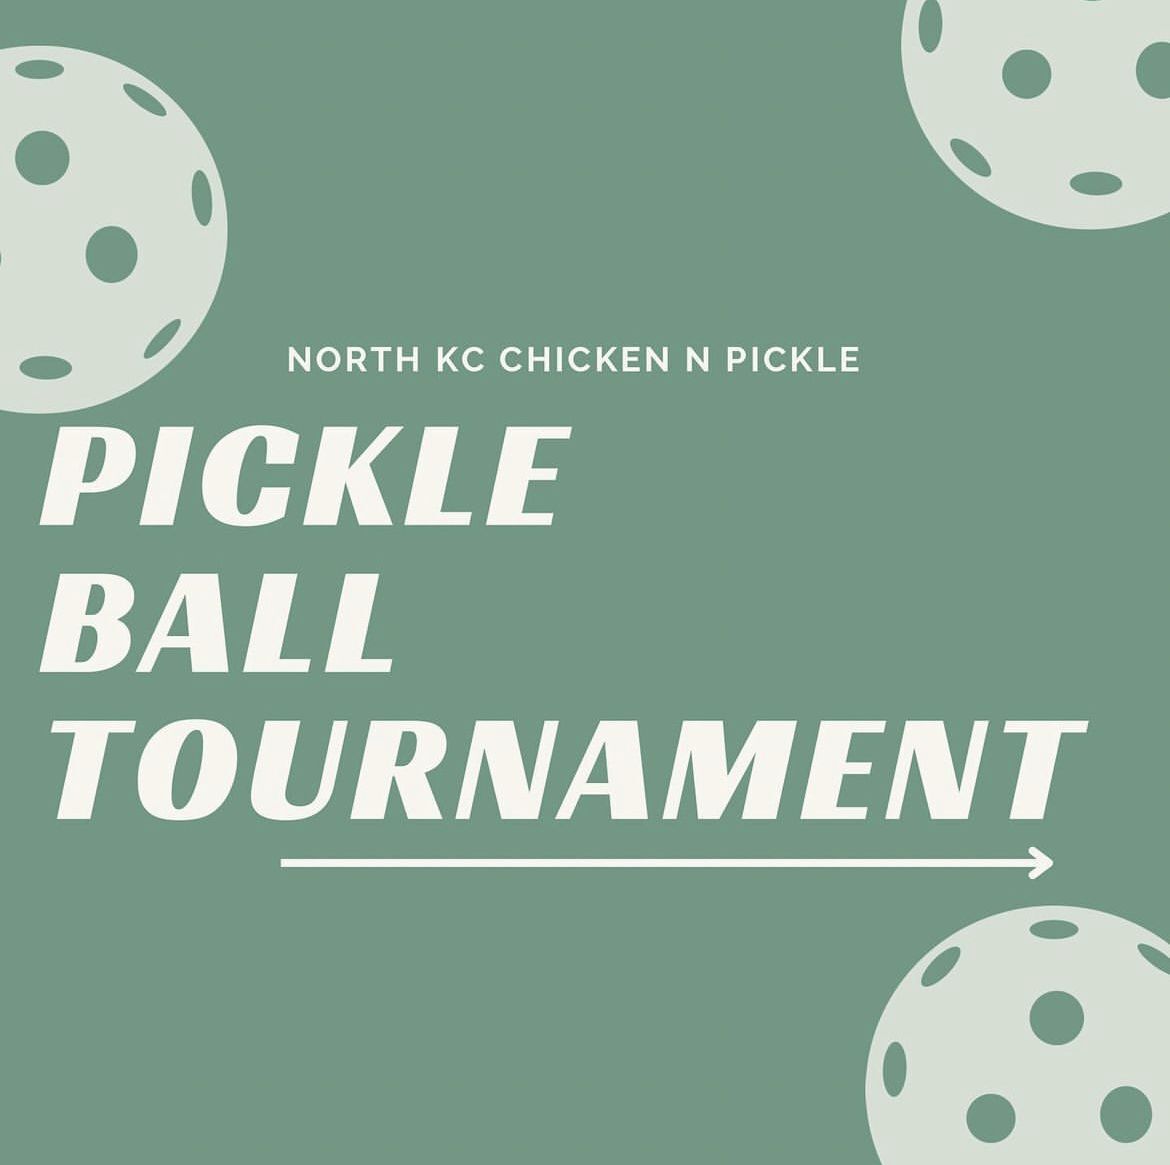 We are so excited to be hosting out second annual PickleBall Tournament. We hope you can join us this May!